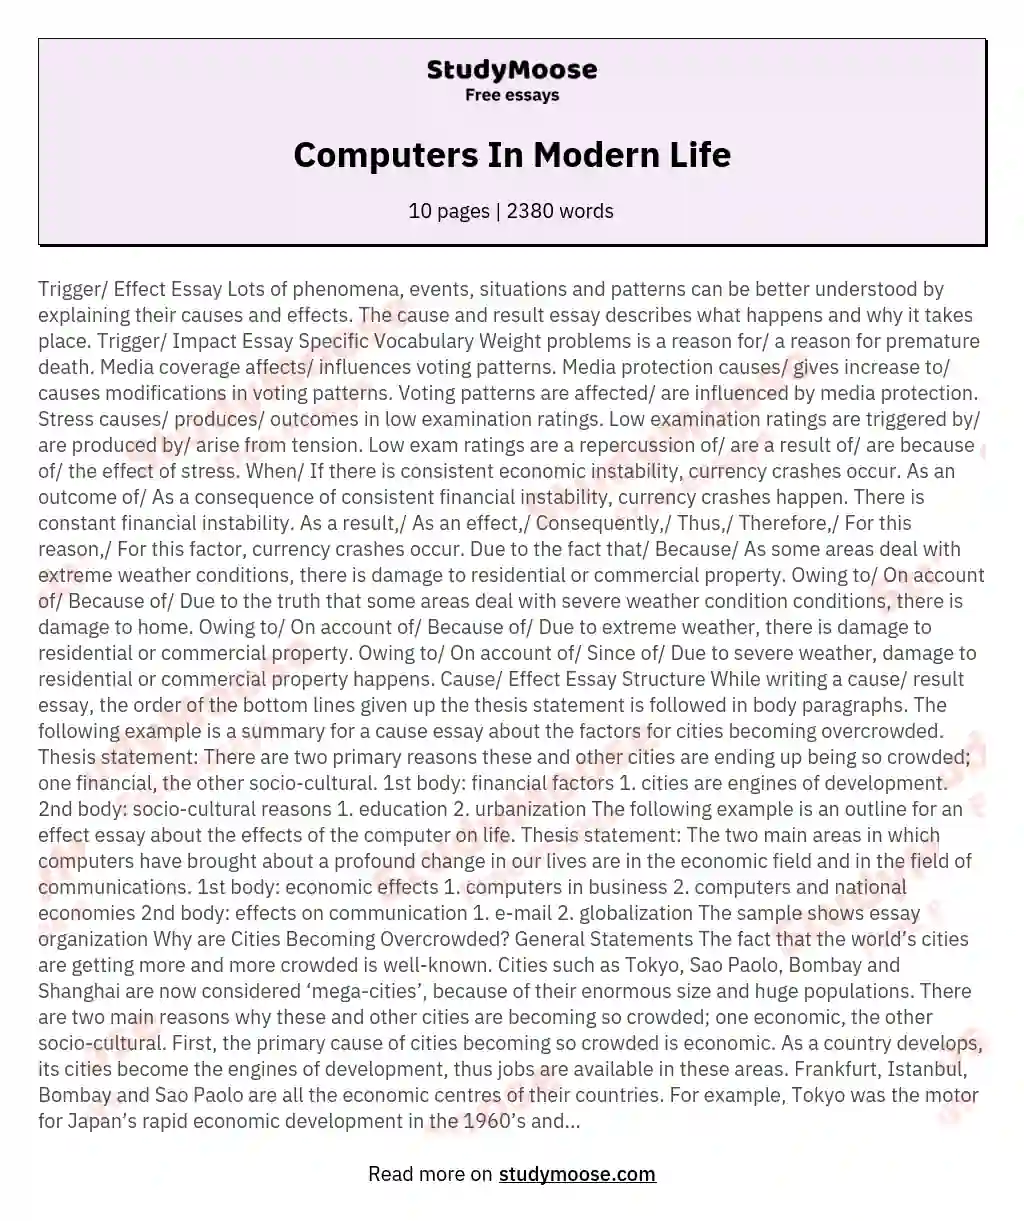 Computers In Modern Life essay